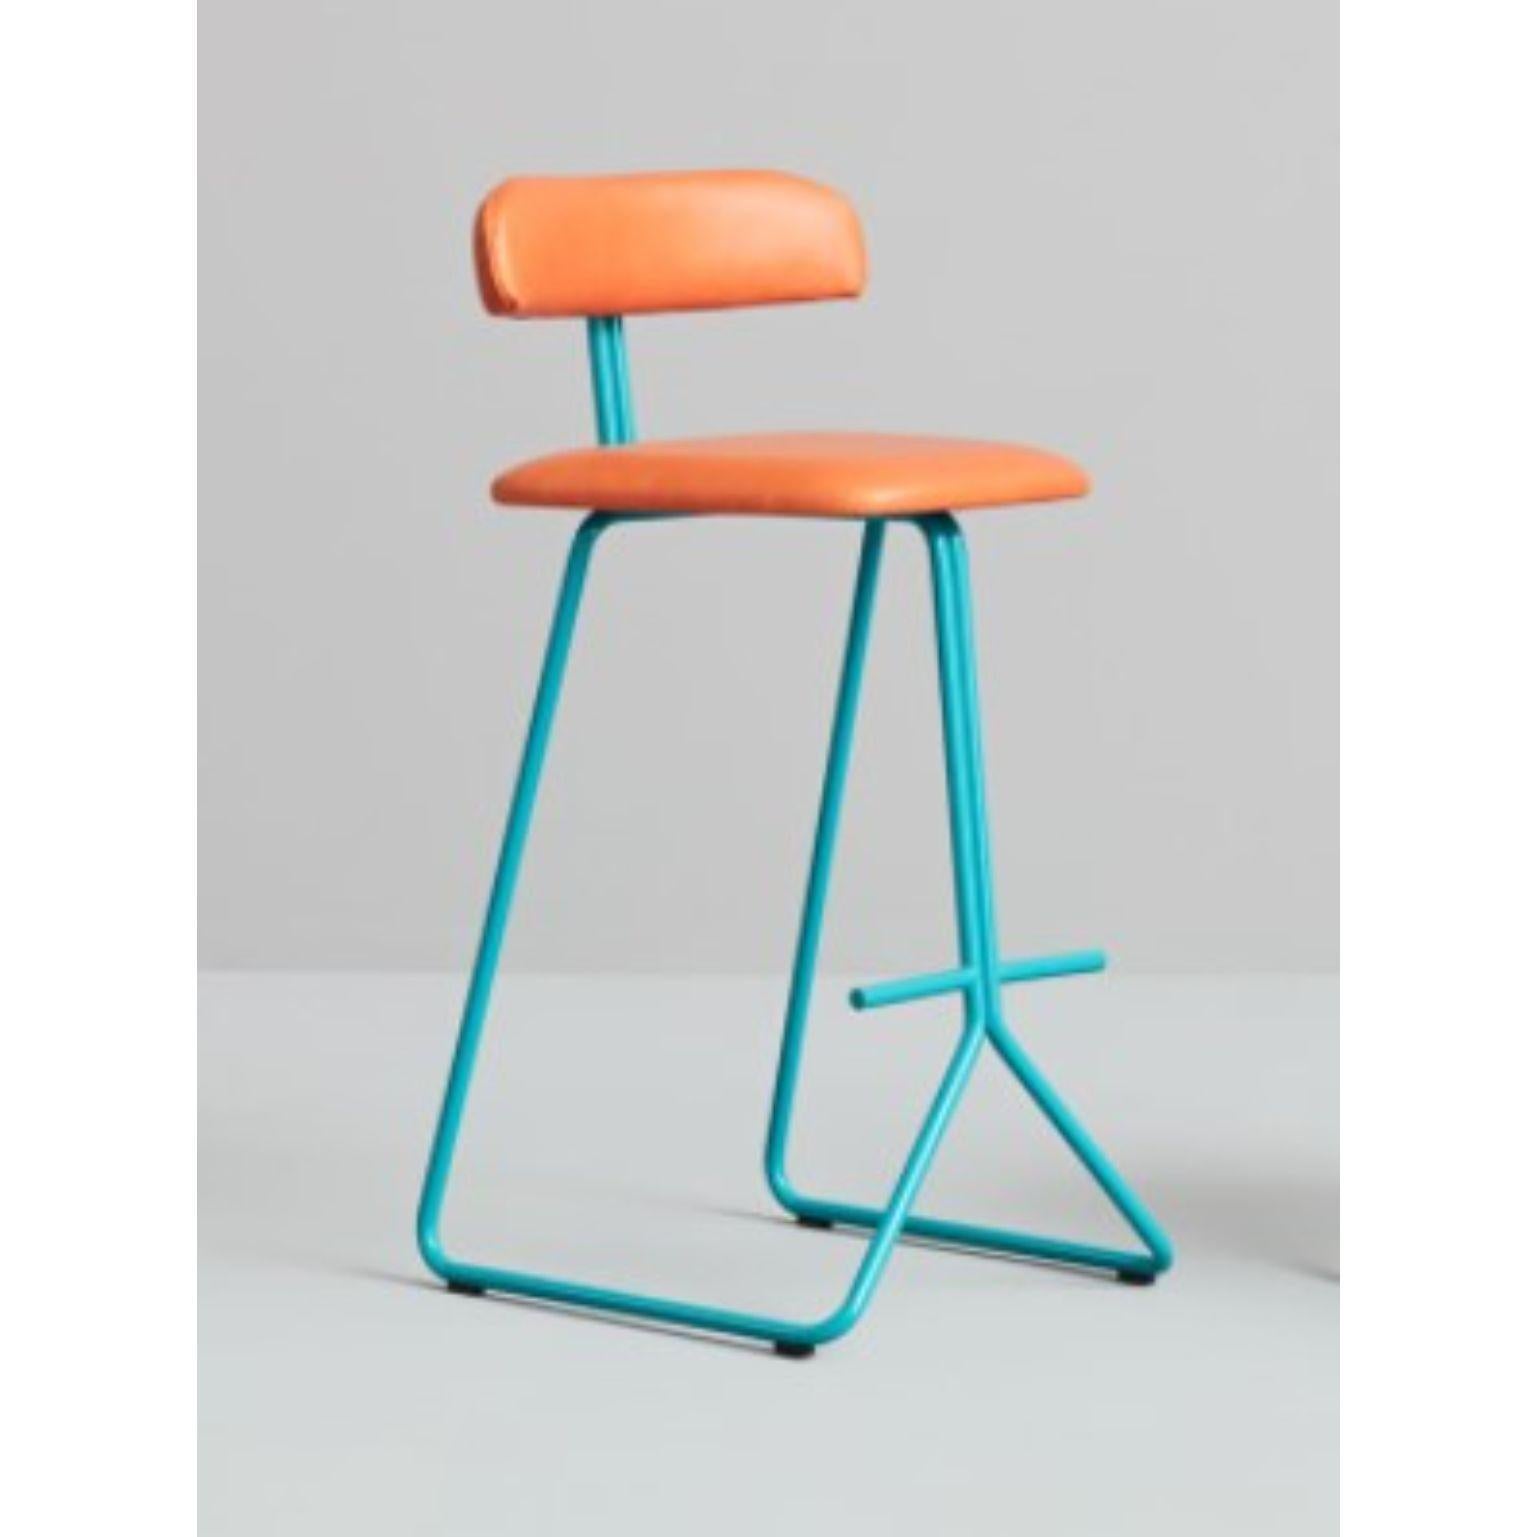 Rider Stool by Pepe Albargues
Dimensions: W 50, D 56, H 104, Seat78
Materials: Crome plated or painted iron structure
Foam CMHR (high resilience and flame retardant) for all our cushion filling systems
Copper(gloss-matt) finishings

Also available: